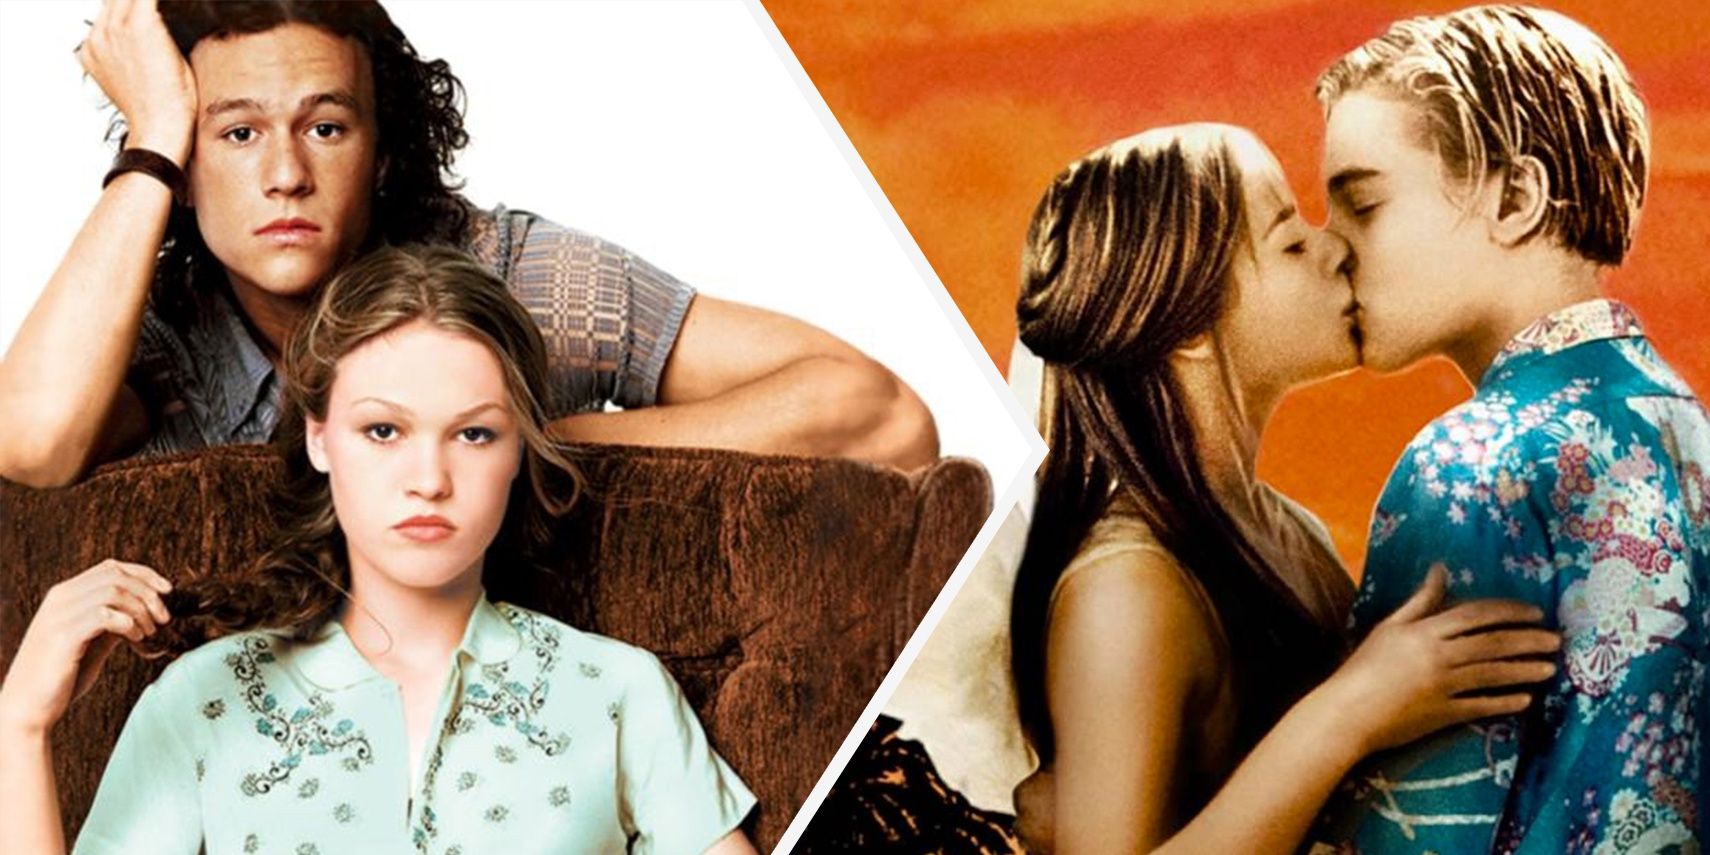 10 Things I Hate Abut You movie versus Romeo + Juliet